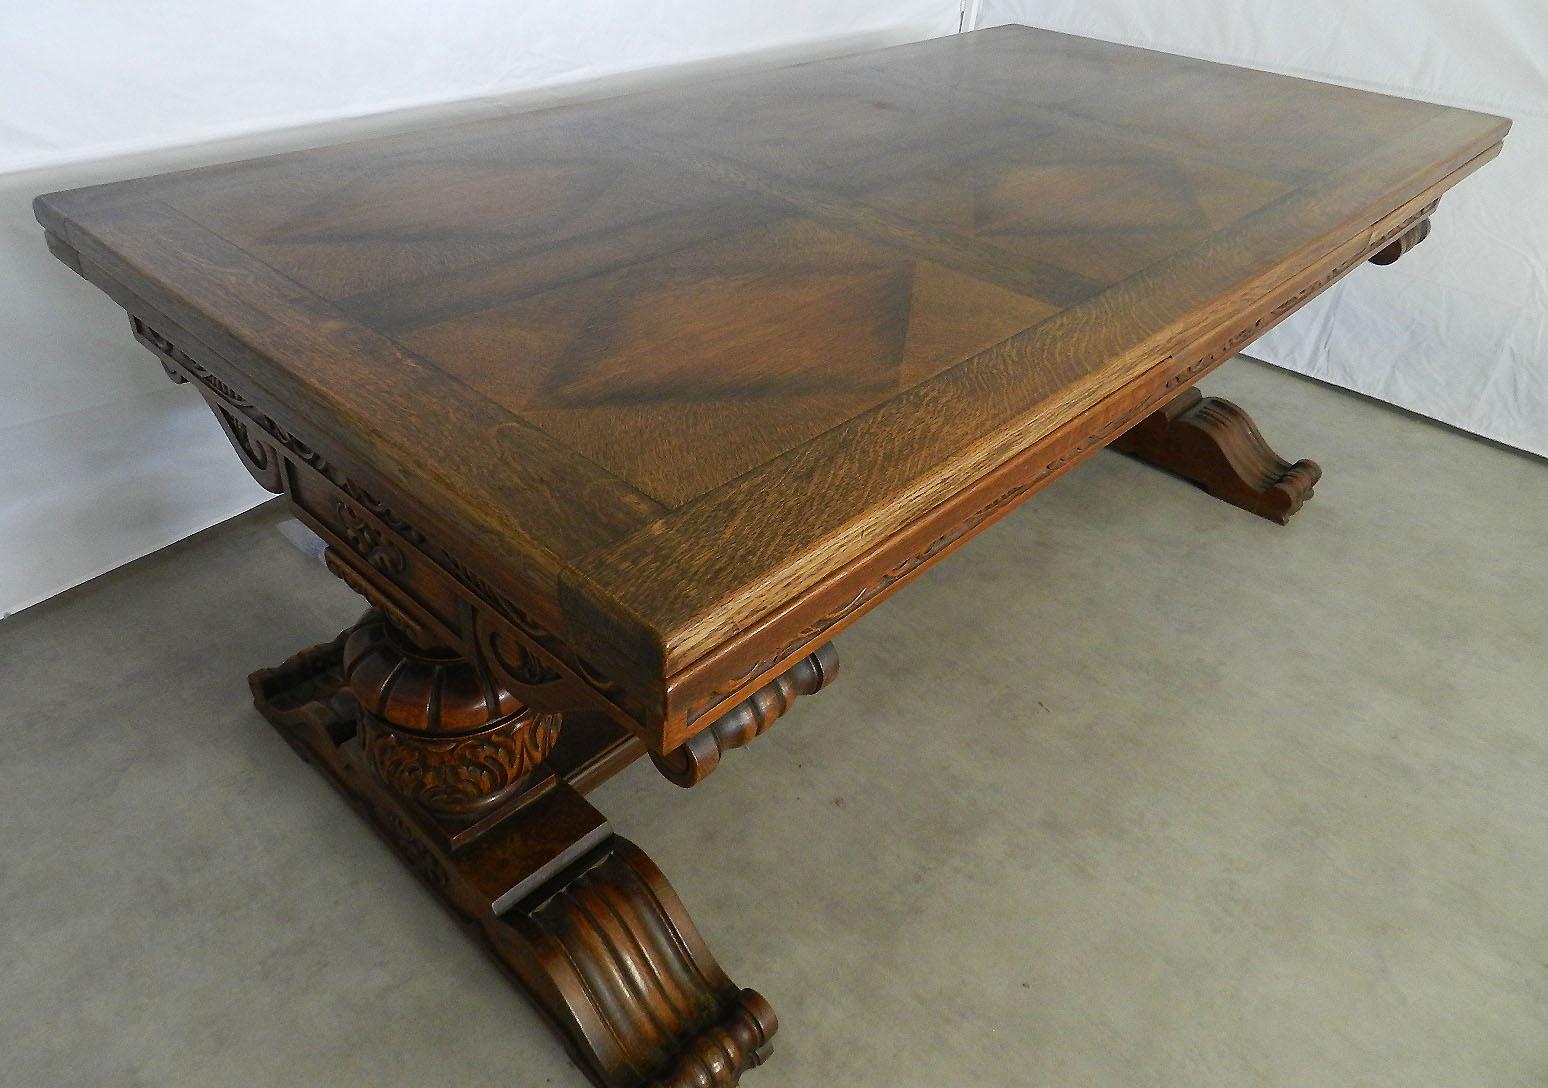 Oak Dining Table Renaissance Revival Refectory Extends Diamond Parquet Top In Good Condition For Sale In Labrit, Landes